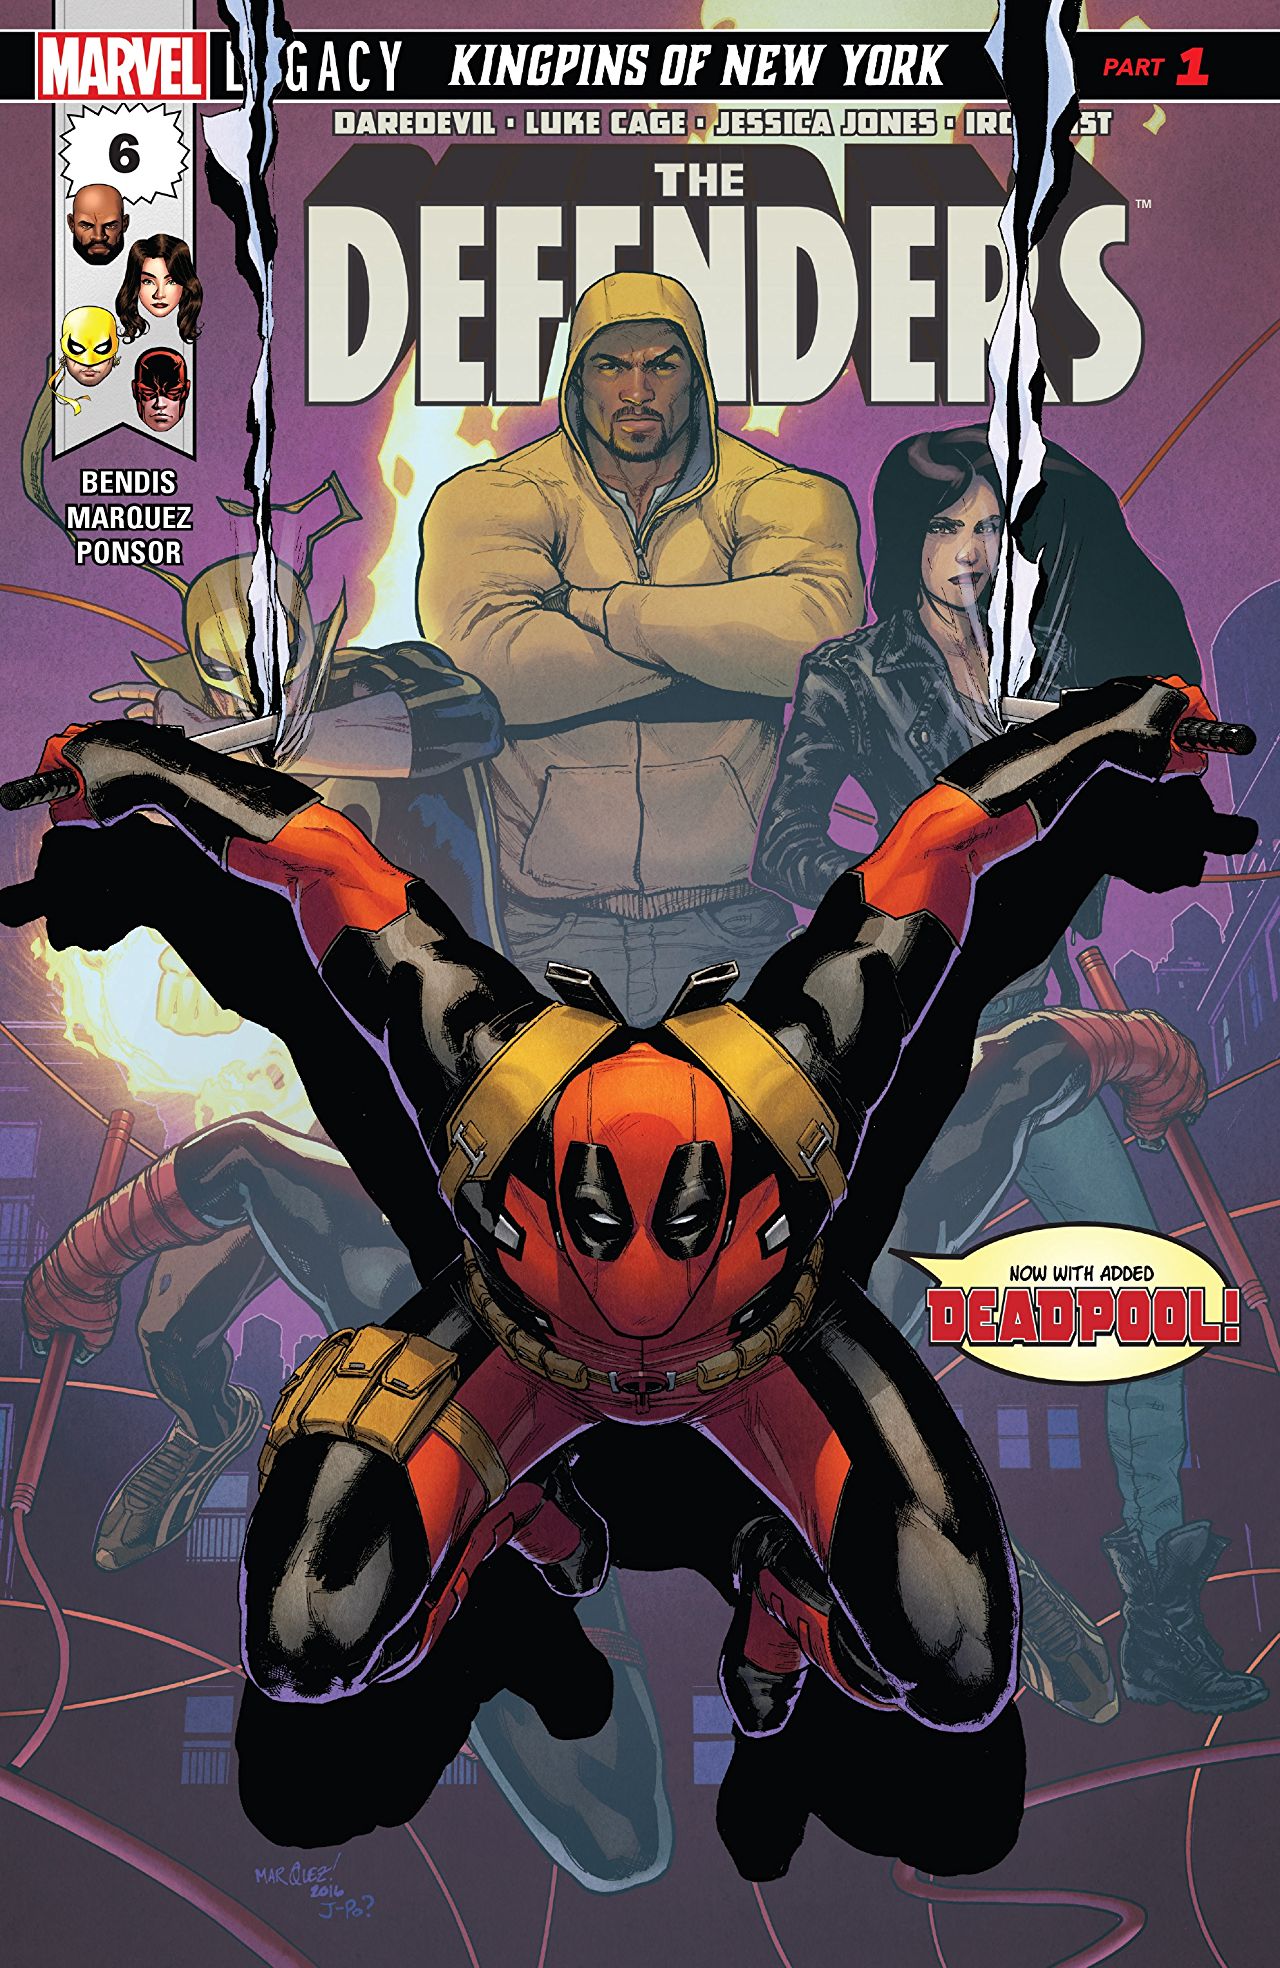 The Defenders #6 Review